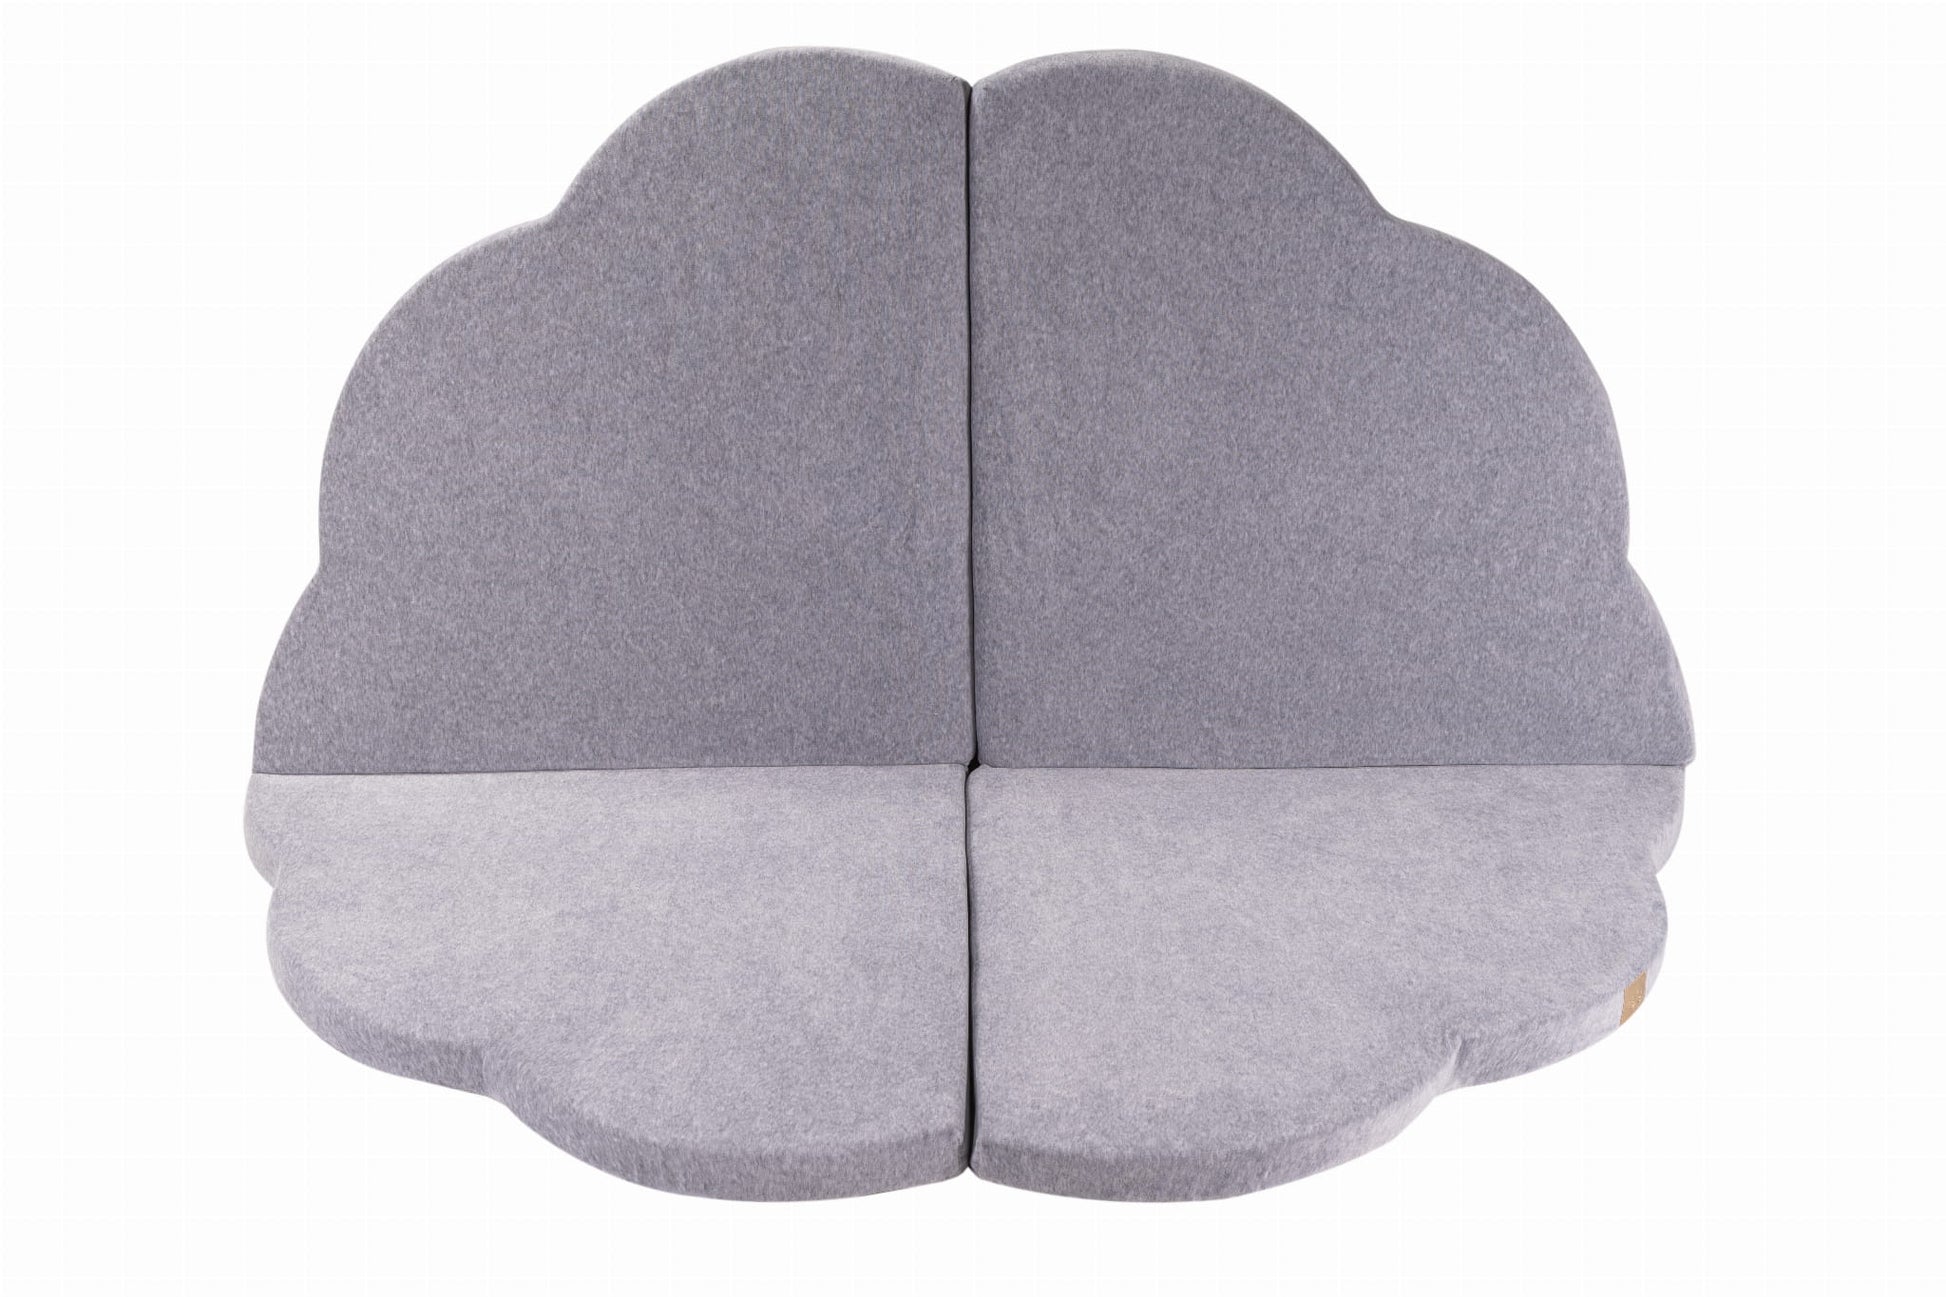 Cloud Foldable Foam Play Mat For Baby By MeowBaby - Stylemykid.com